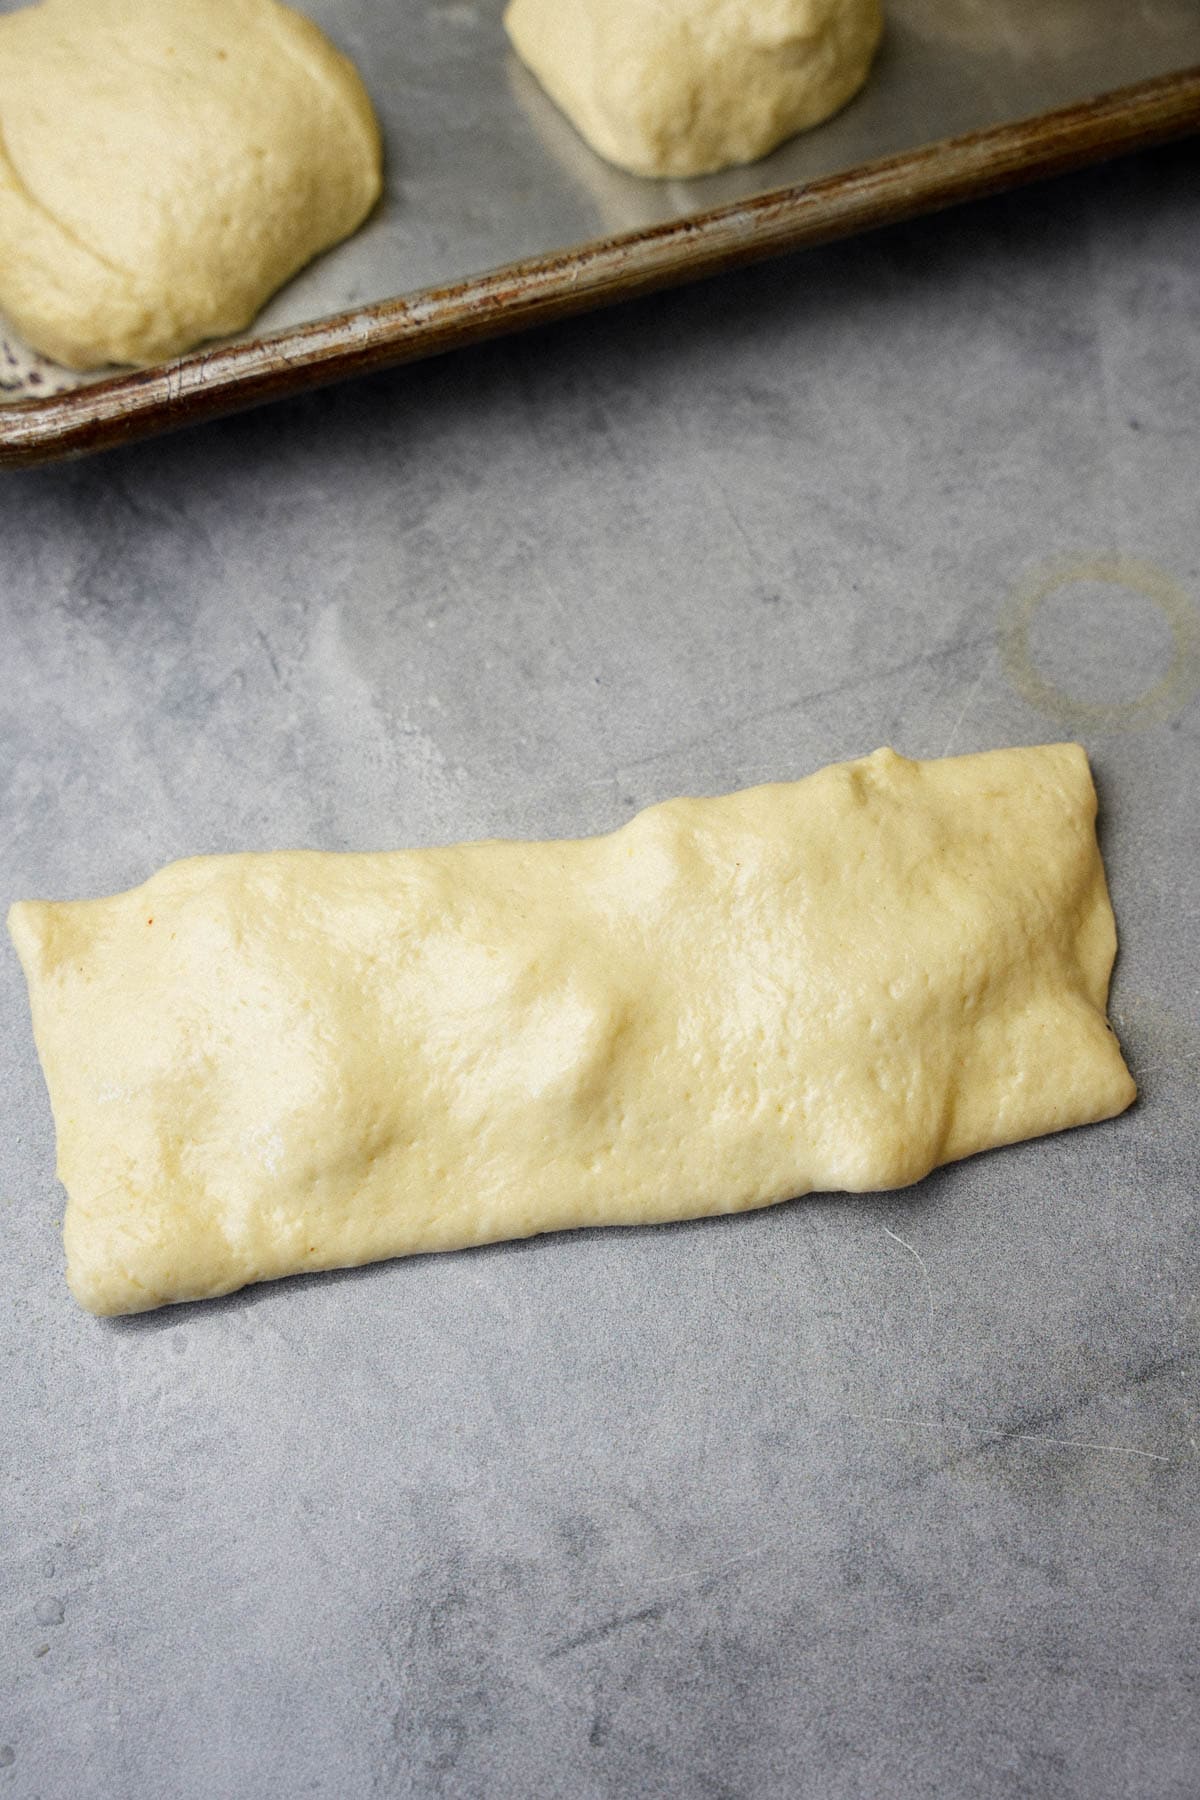 Butter filled dough is folded over into a rectangle shape.